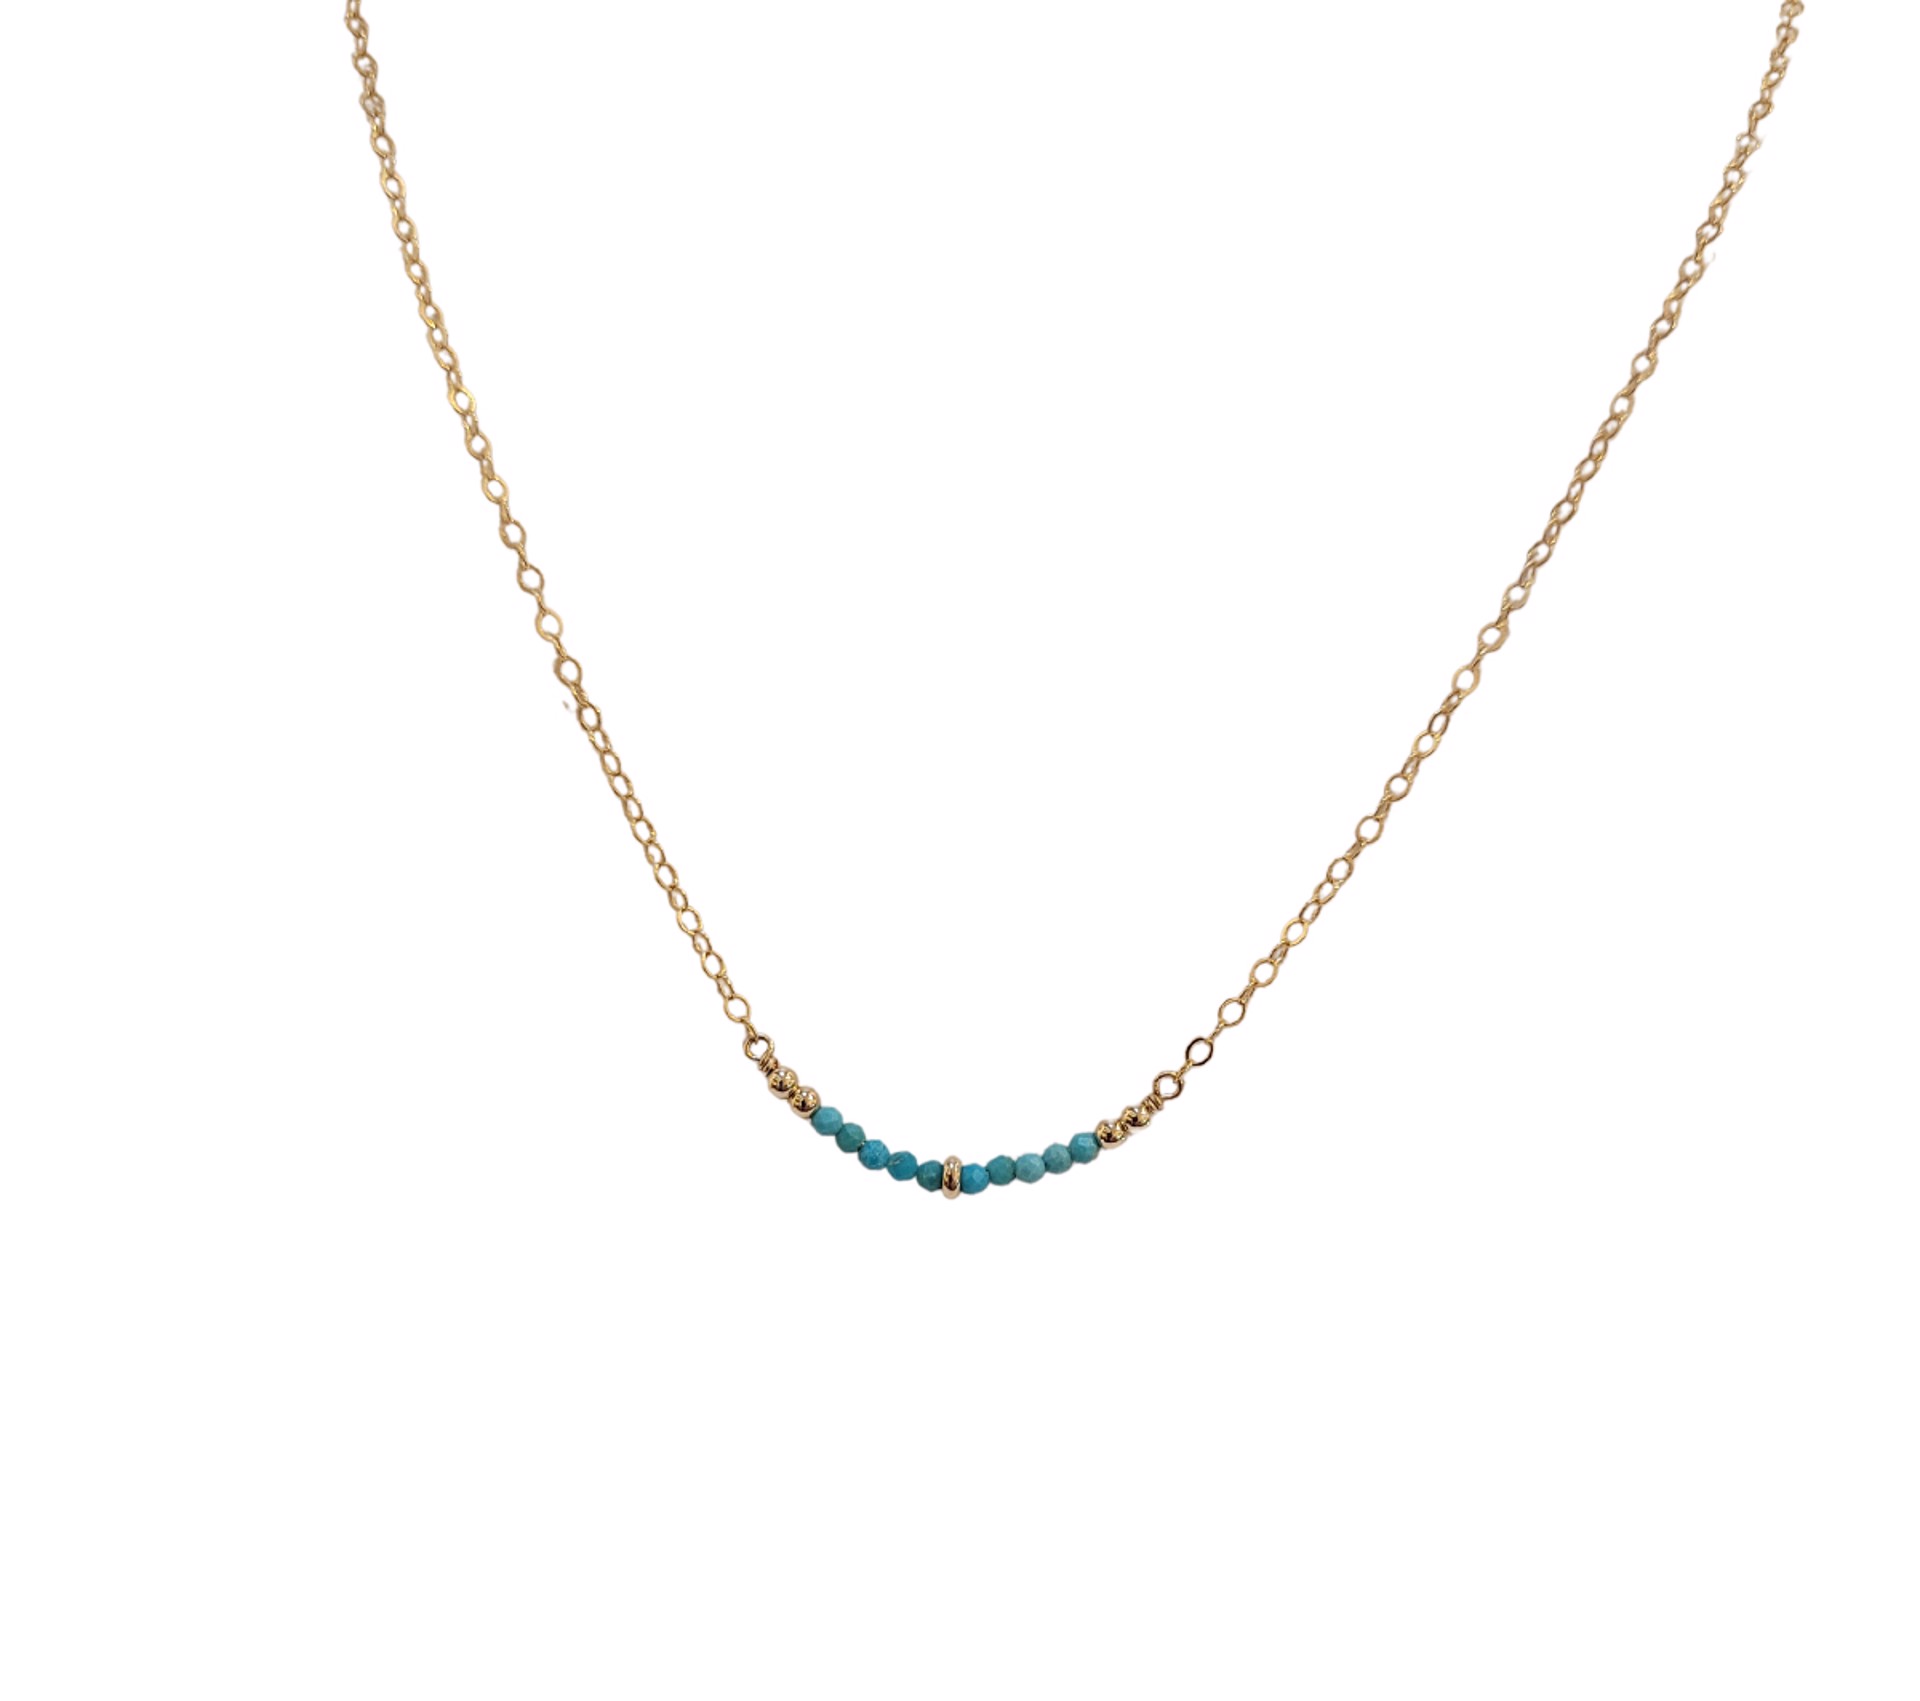 Necklace -  Sleeping Beauty Turquoise Crescent 14K Gold Filled by Julia Balestracci